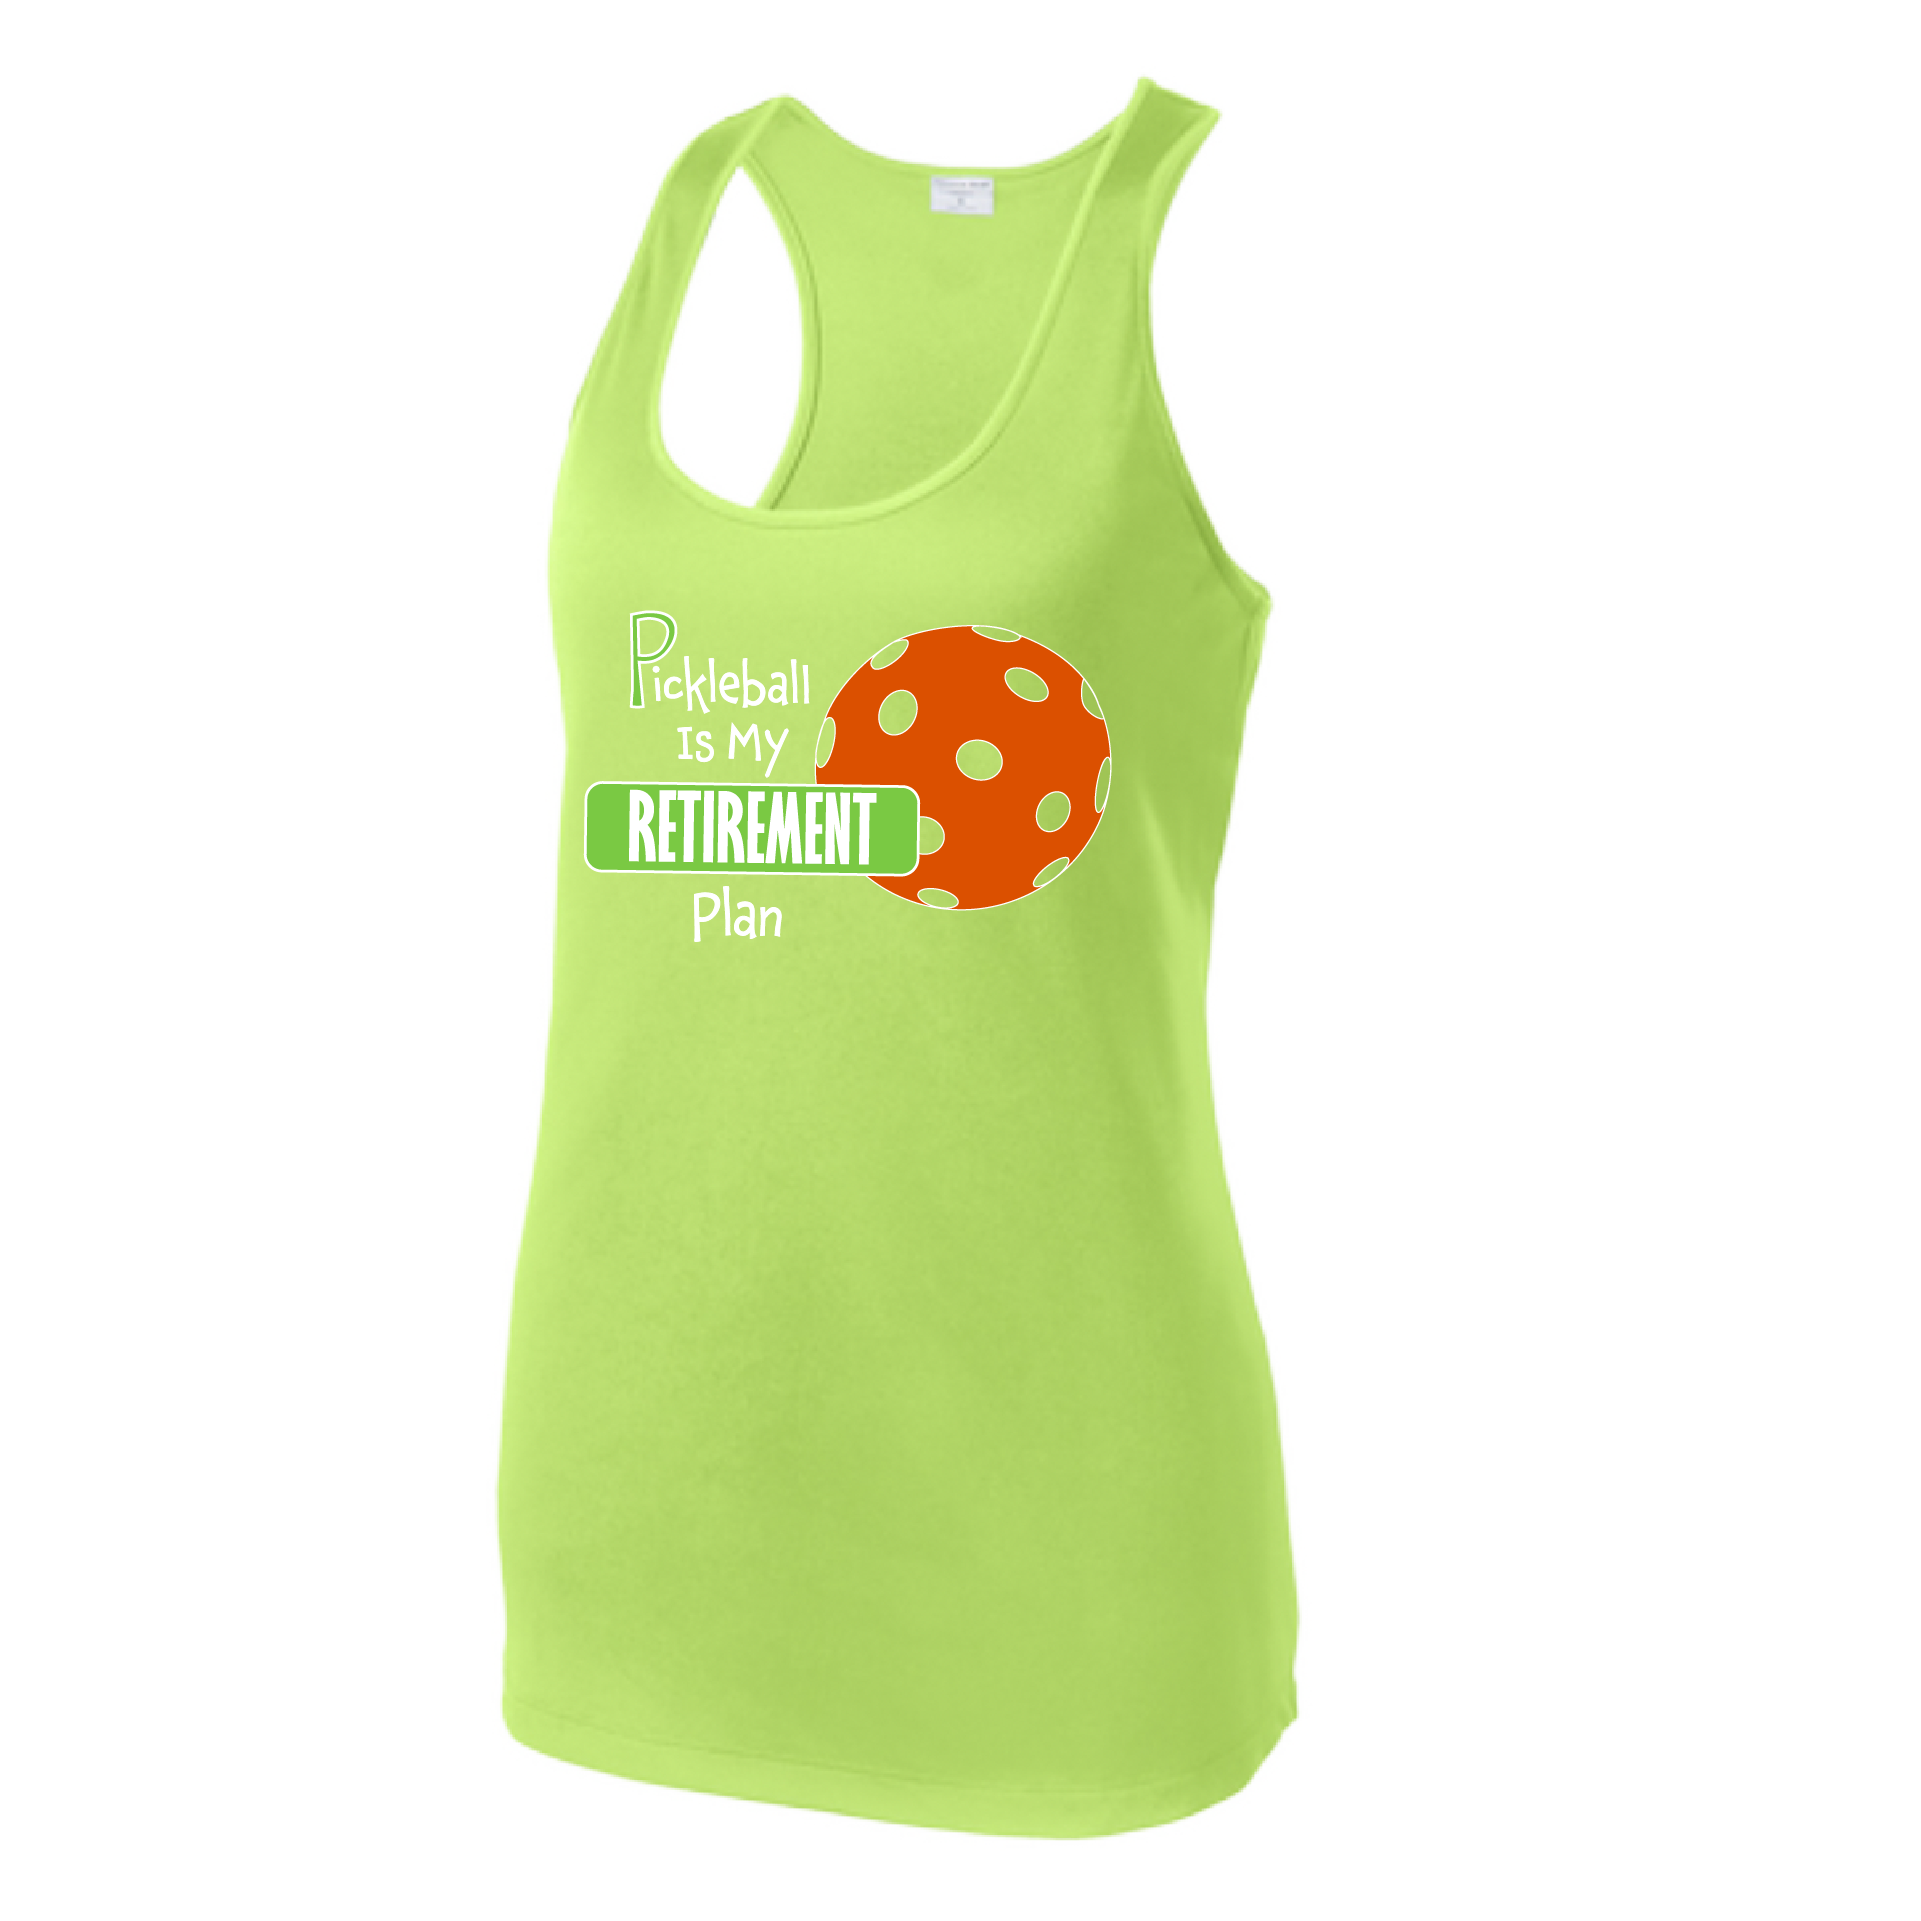 Pickleball Design: Pickleball is my Retirement plan  Women's Style: Racerback Tank  Turn up the volume in this Women's shirt with its perfect mix of softness and attitude. Material is ultra-comfortable with moisture wicking properties and tri-blend softness. PosiCharge technology locks in color. Highly breathable and lightweight.